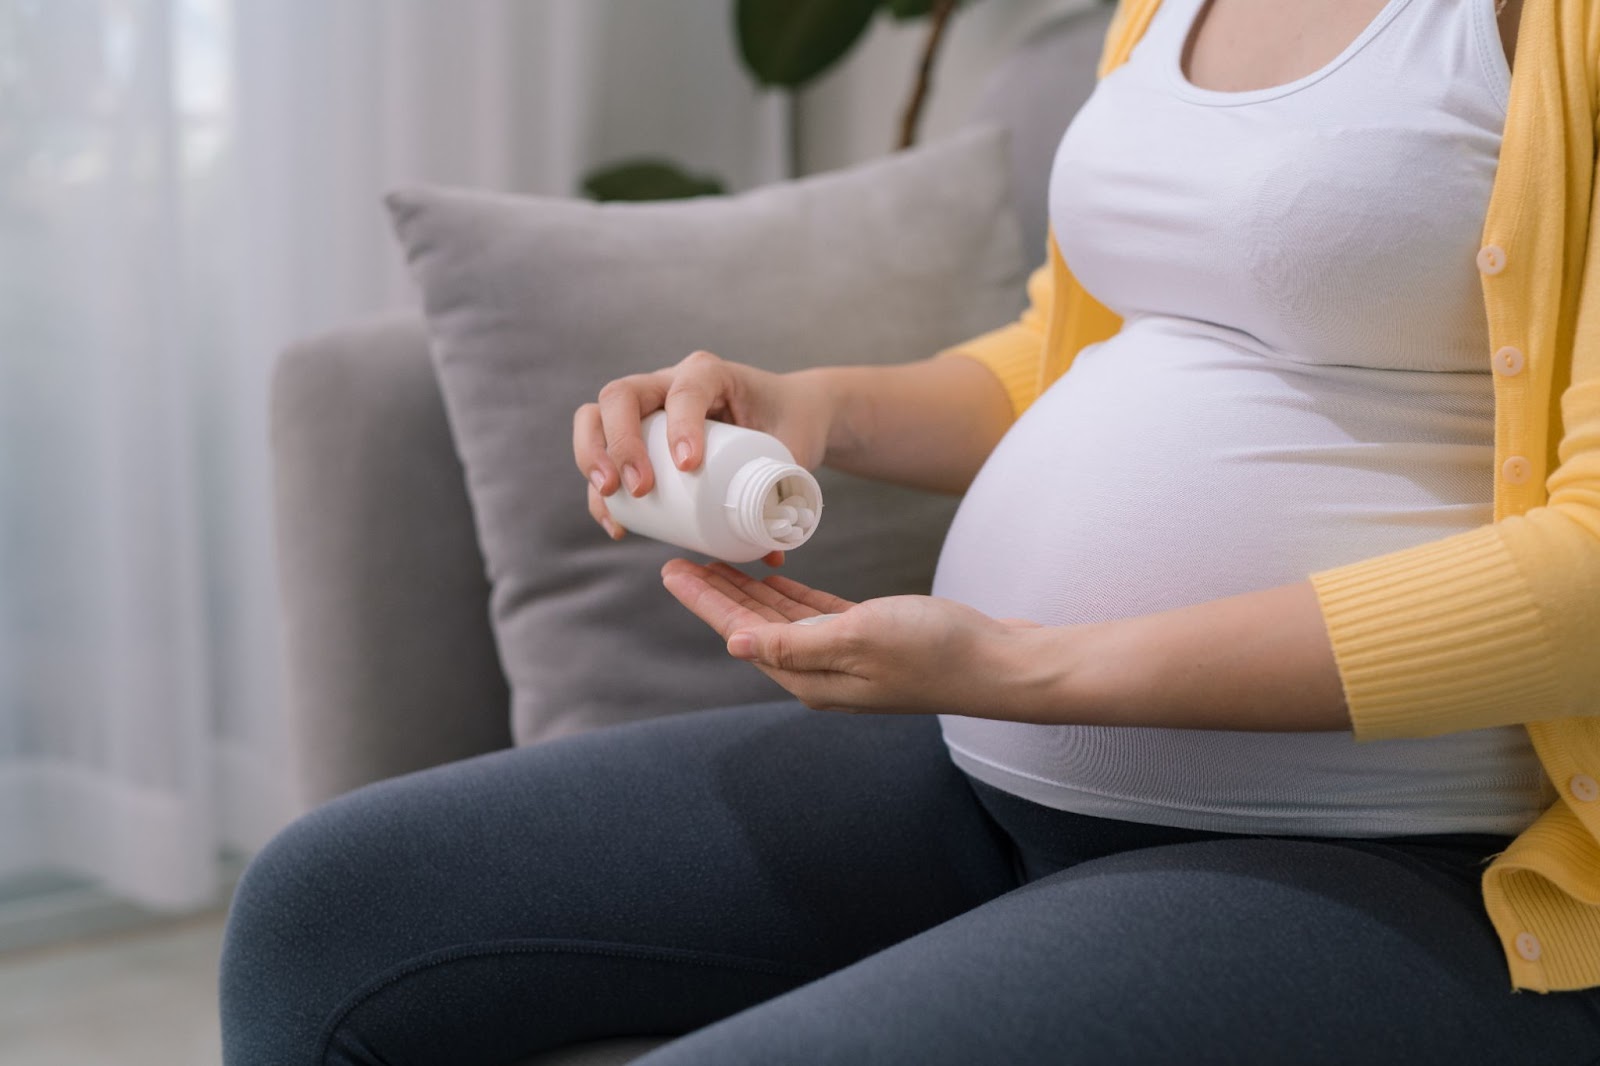 A pregnant woman sitting on a couch before taking an acetylcysteine tablet.